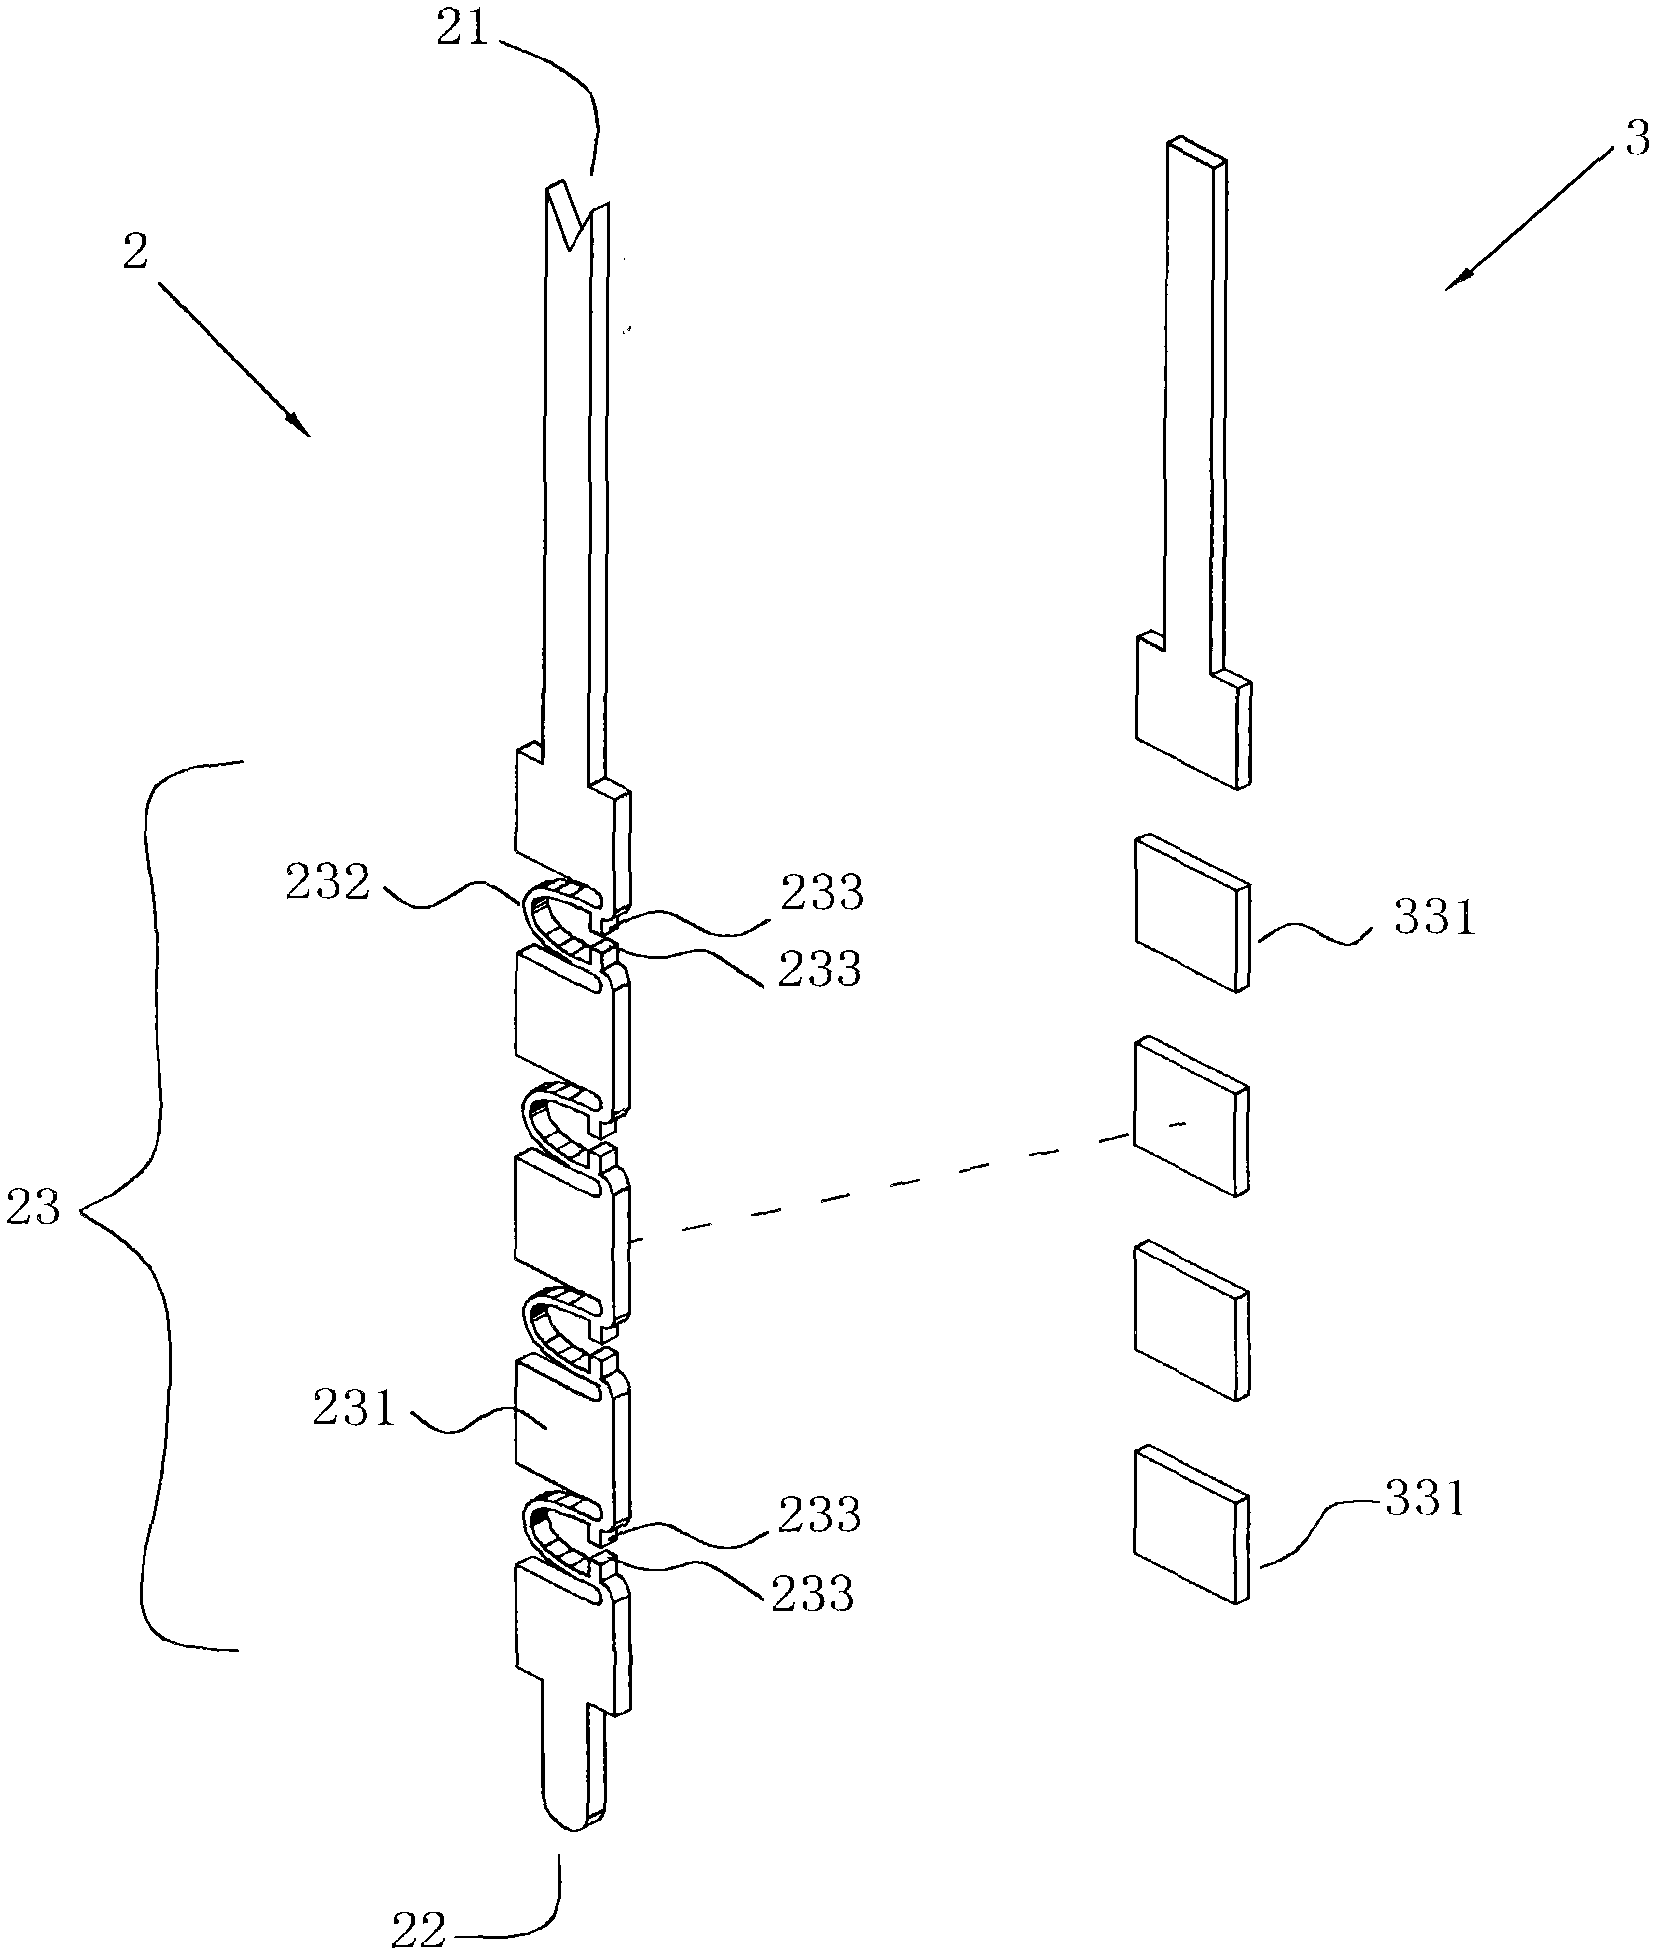 High-frequency vertical spring probe card structure